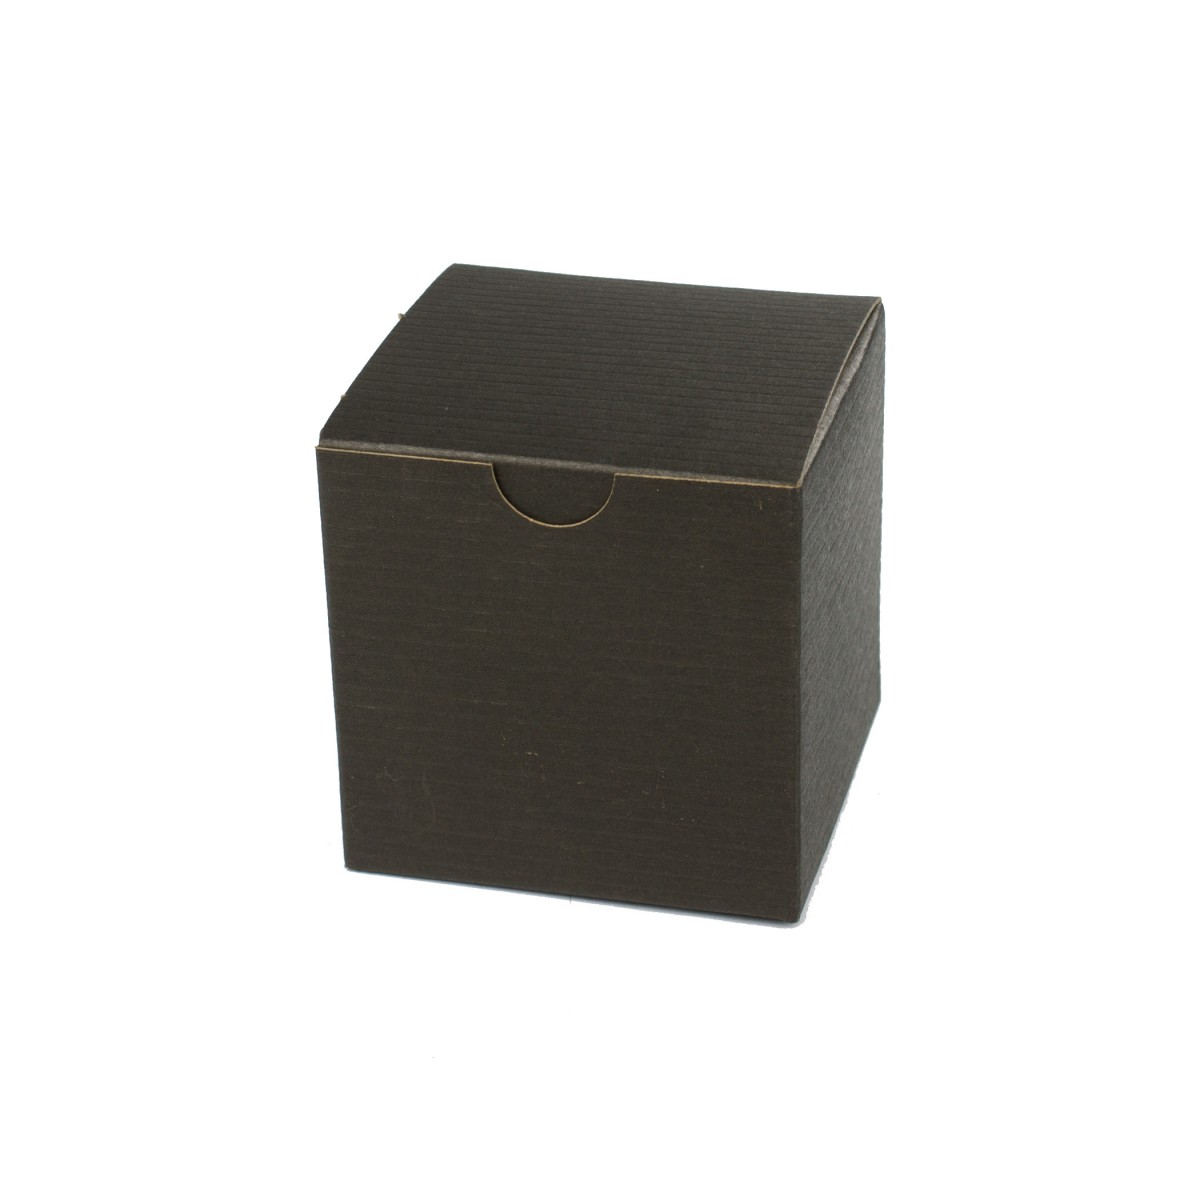 Download 3x3x3 Black Pinstripe One Piece Tuck Top Gift Boxes